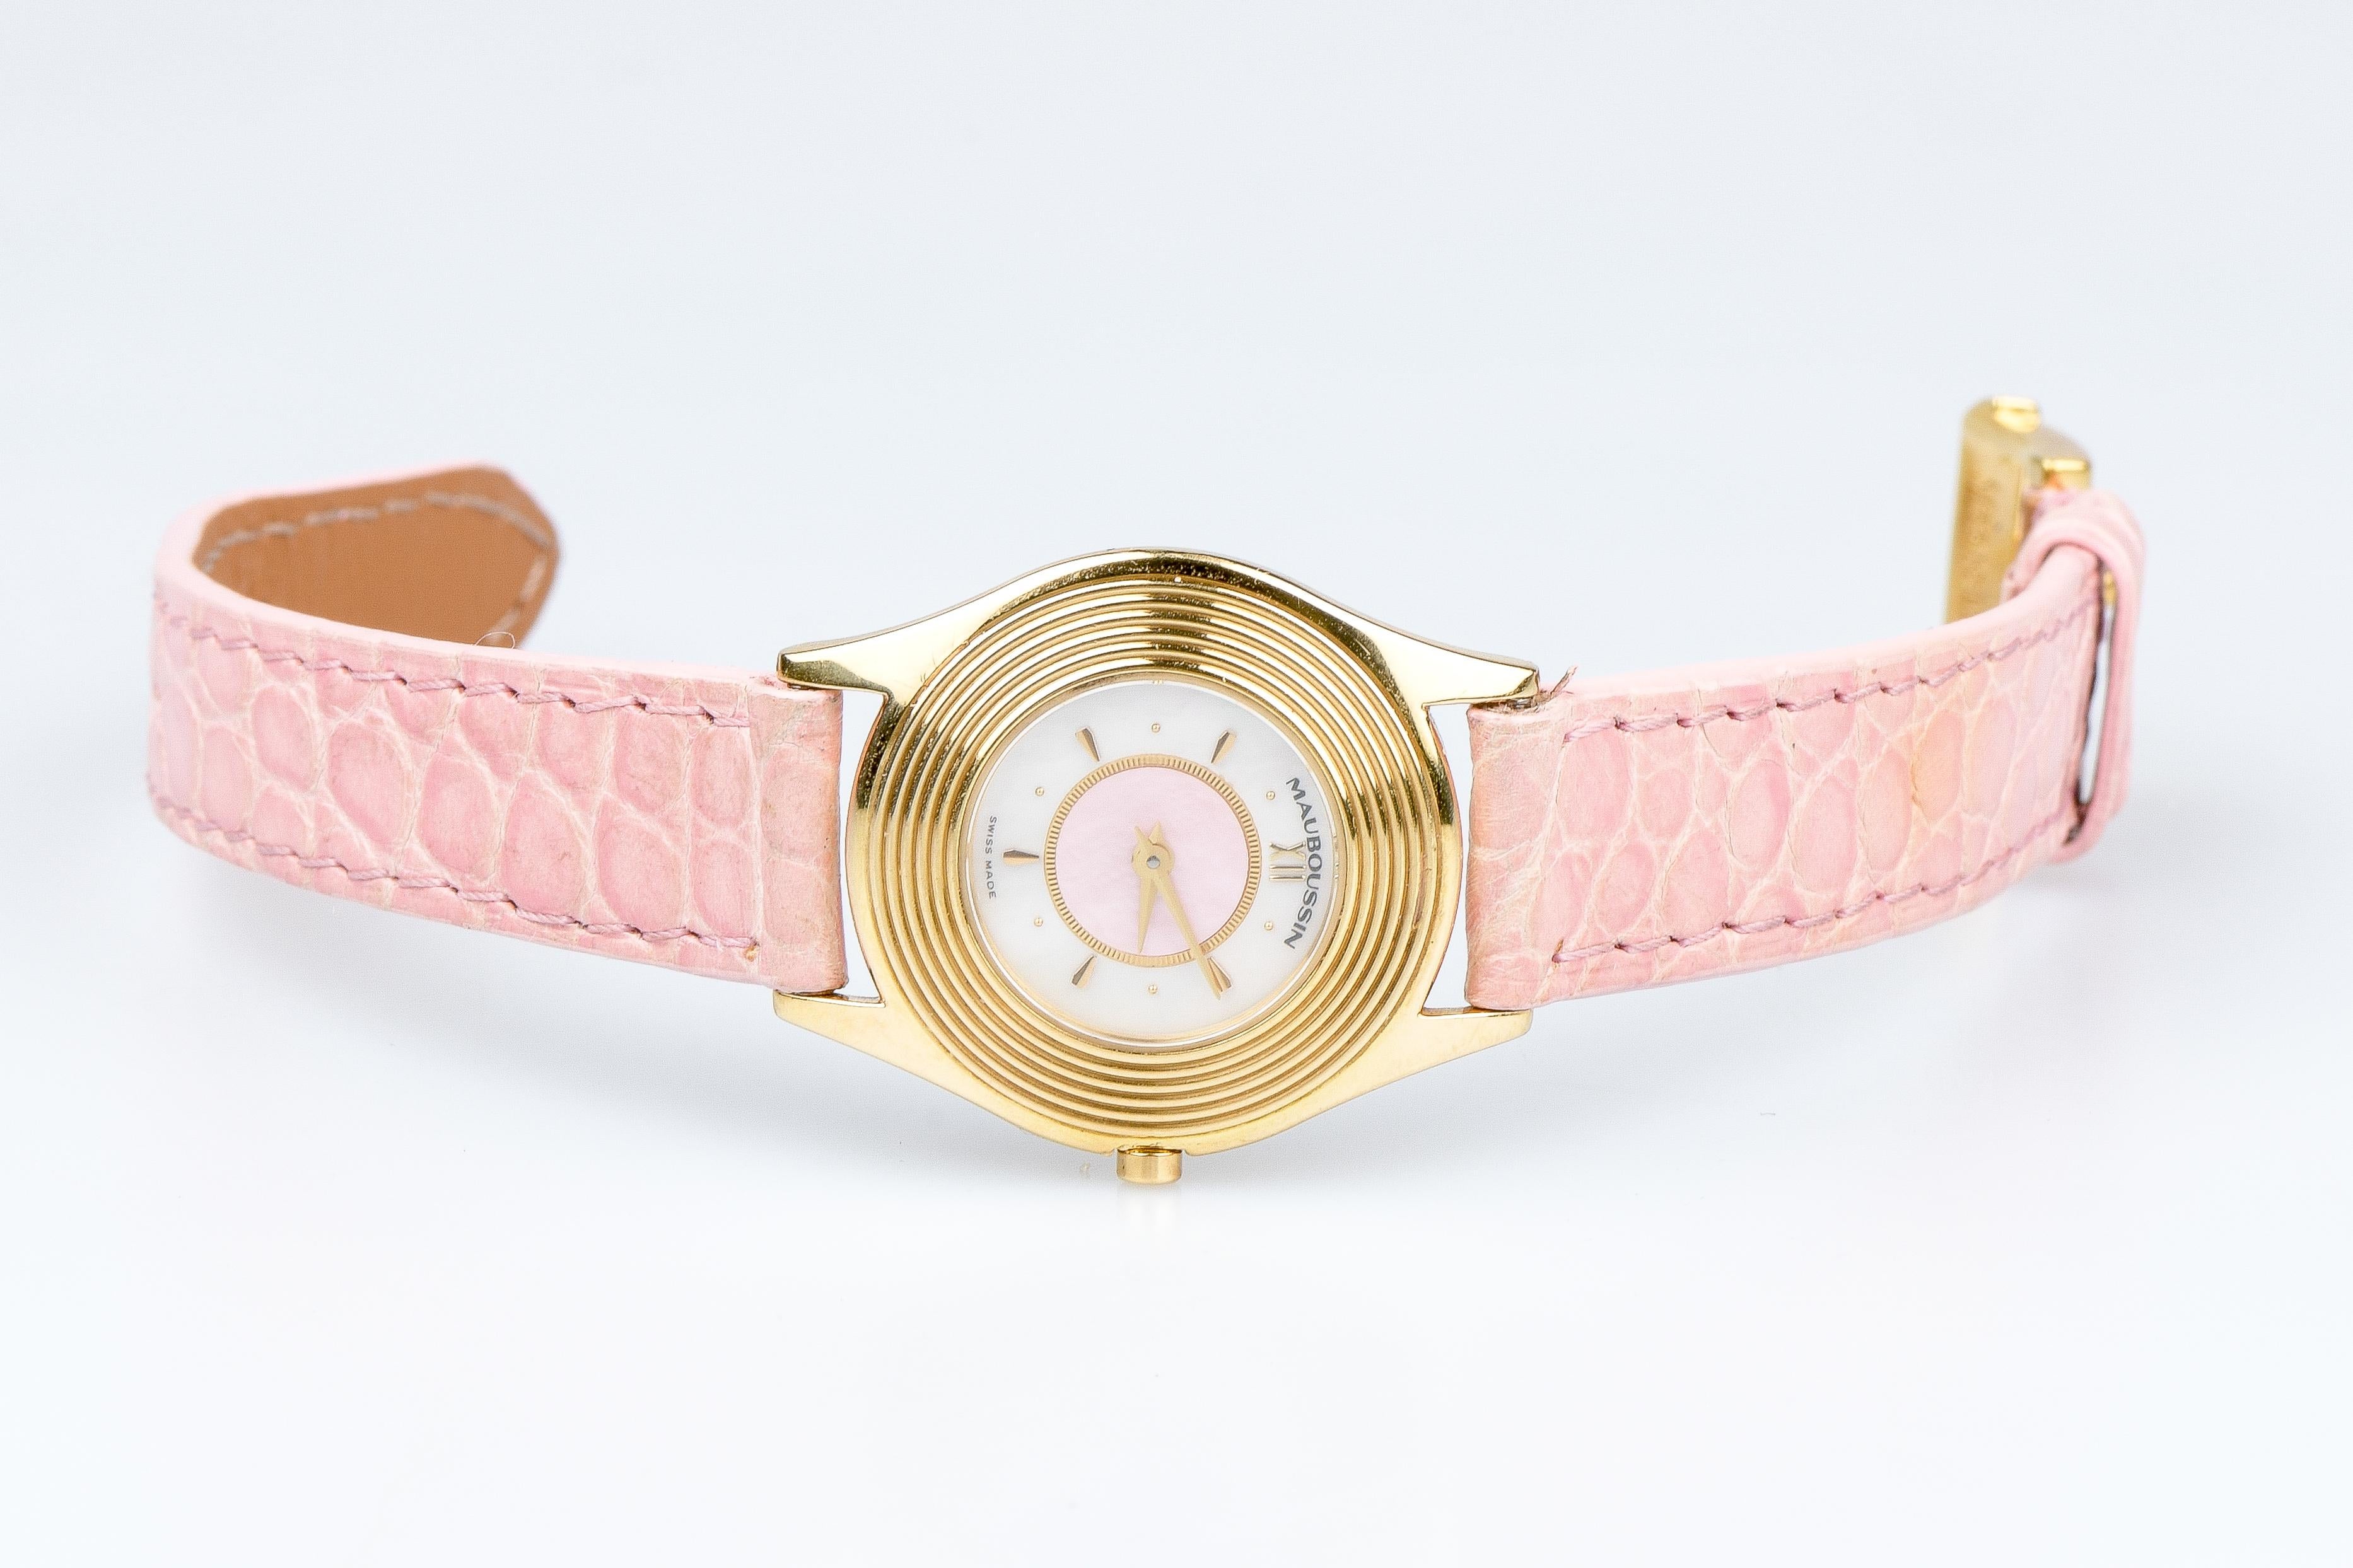 Mauboussin 18 carat yellow gold watch designed with a pink leather bracelet. 
Reference number 62682 - N: 199 G - Made in Switzerland.

Weight : 18.60 gr.

Dimensions : 20 cm
Dial : 2.70 x 2.60 cm

Watch delivered with its certificate in a luxurious